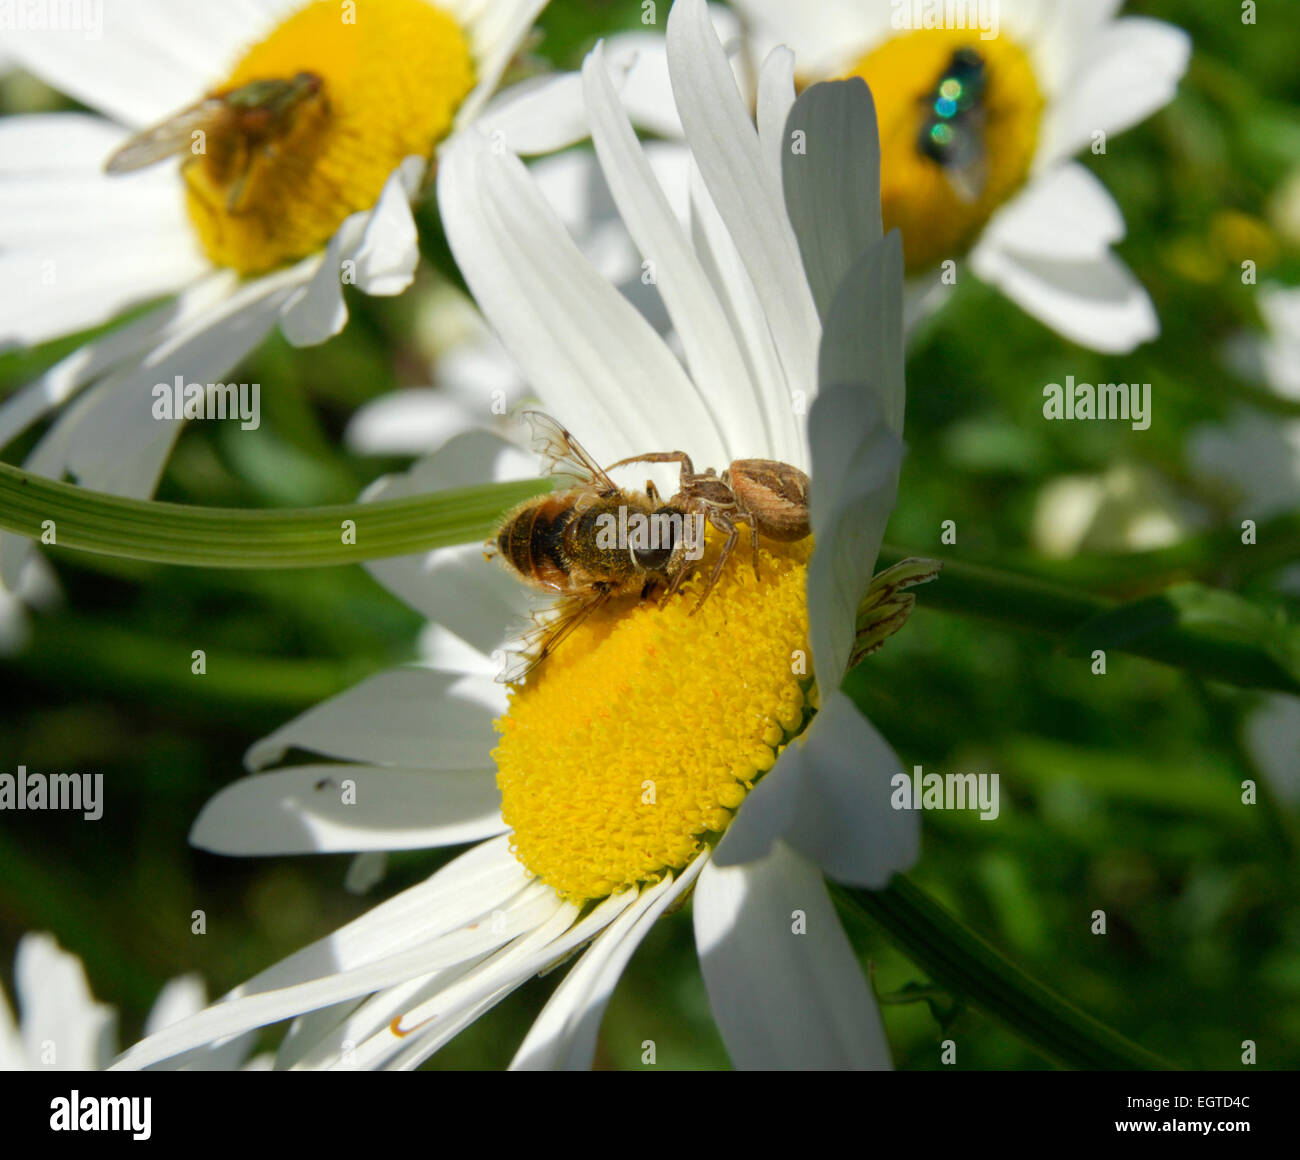 UK garden wildlife.  Predatory spider on ox-eye daisy attempts to subdue a bee.  The bee eventually escaped. Stock Photo